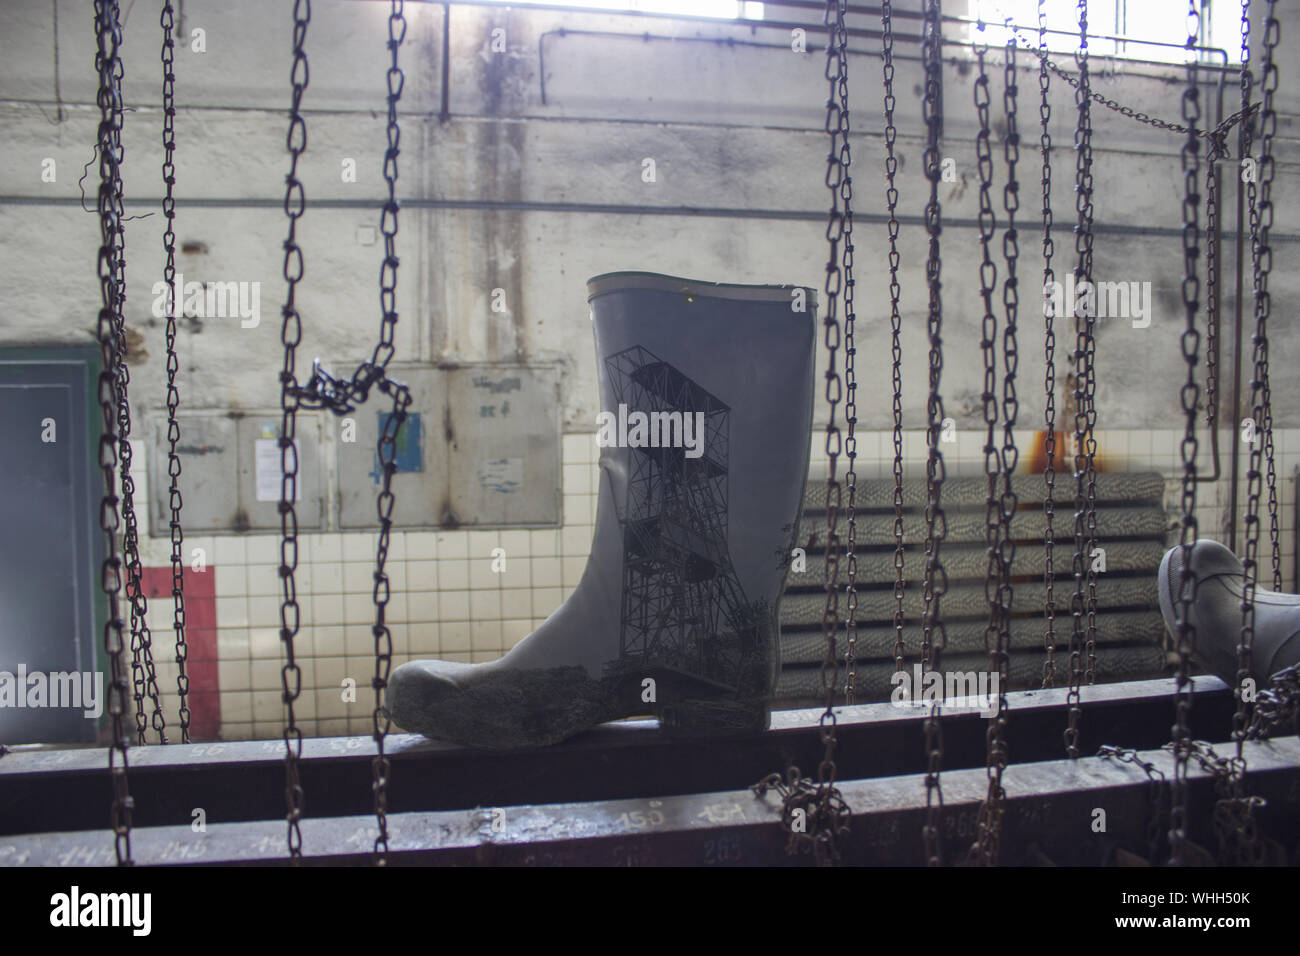 Rubber boots in mining dressing room and chains Stock Photo